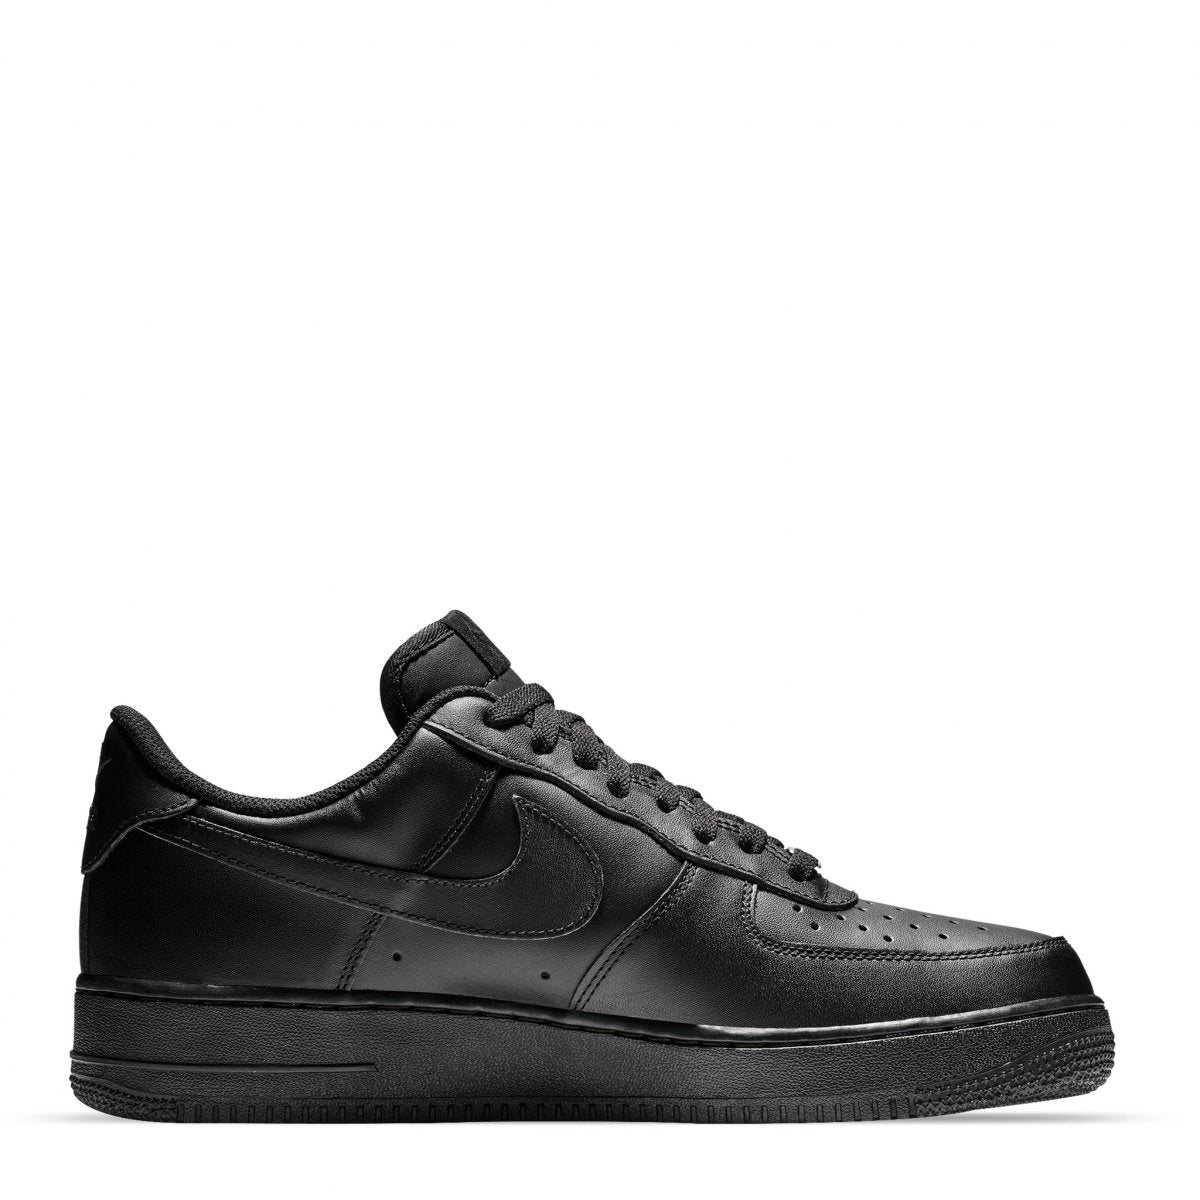 Tenis Nike Air Force One Negro Zapato Hombre y Mujer Deportivo – Tresp´s Technology And